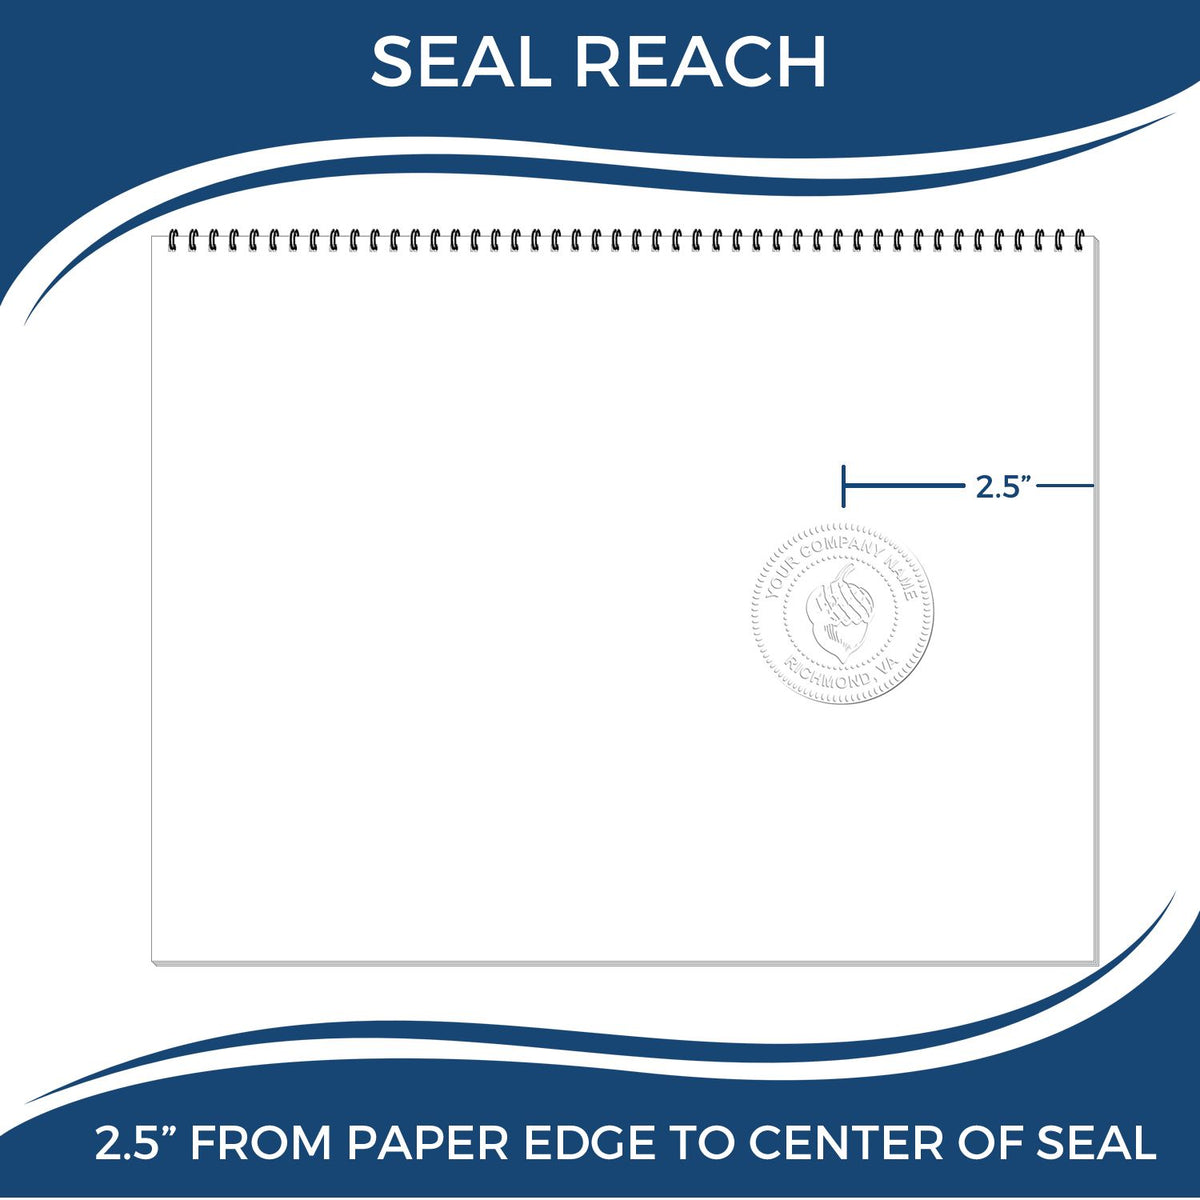 An infographic showing the seal reach which is represented by a ruler and a miniature seal image of the Long Reach Illinois Geology Seal